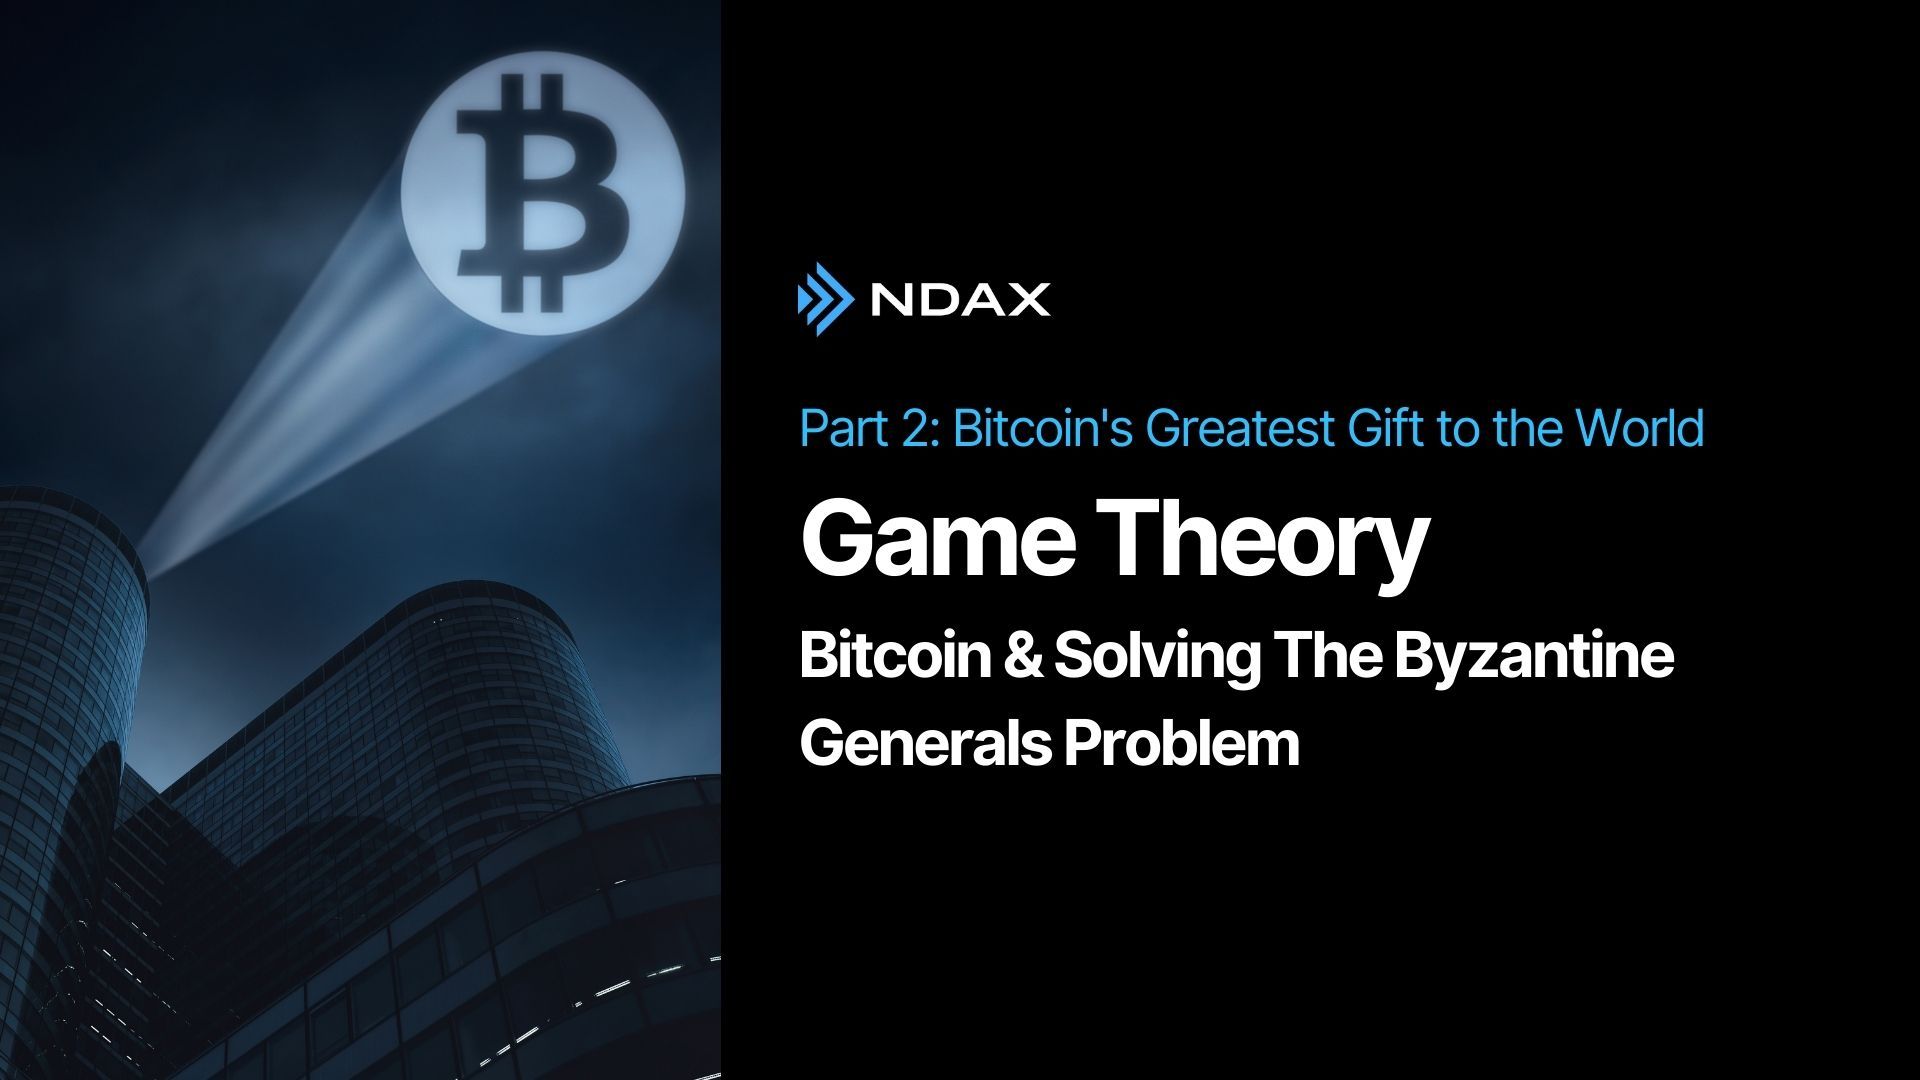 Part 2: Bitcoin's Greatest Gift to the World: Solving the Byzantine Generals Problem